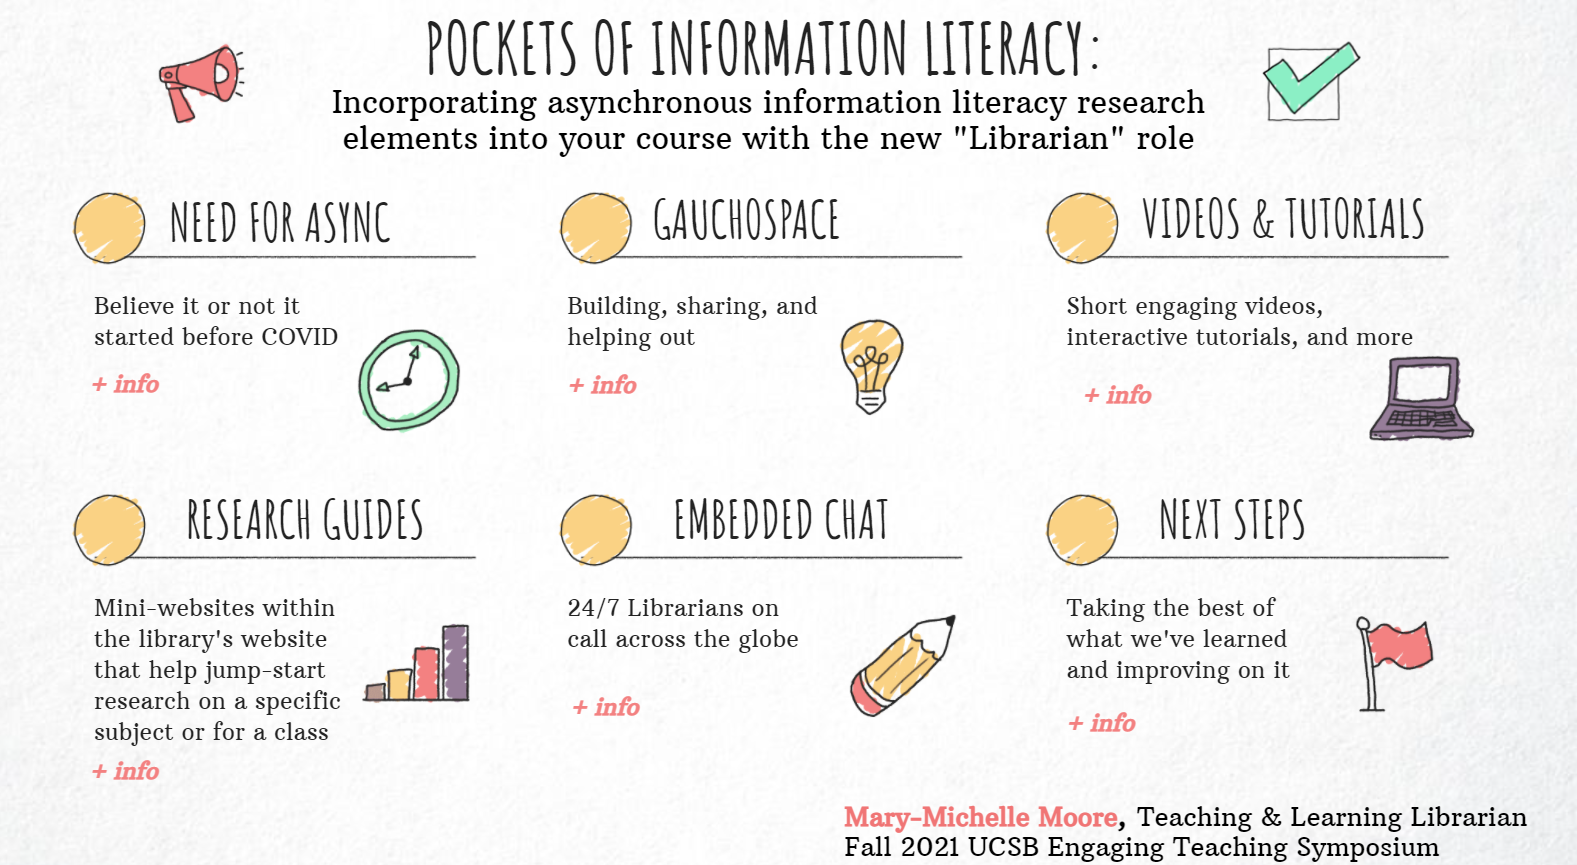 Showcase Image for Mary-Michelle Moore: Pockets of Information Literacy - Incorporating Asynchronous Information Literacy Research Elements into Your Course with the New “Librarian” Role